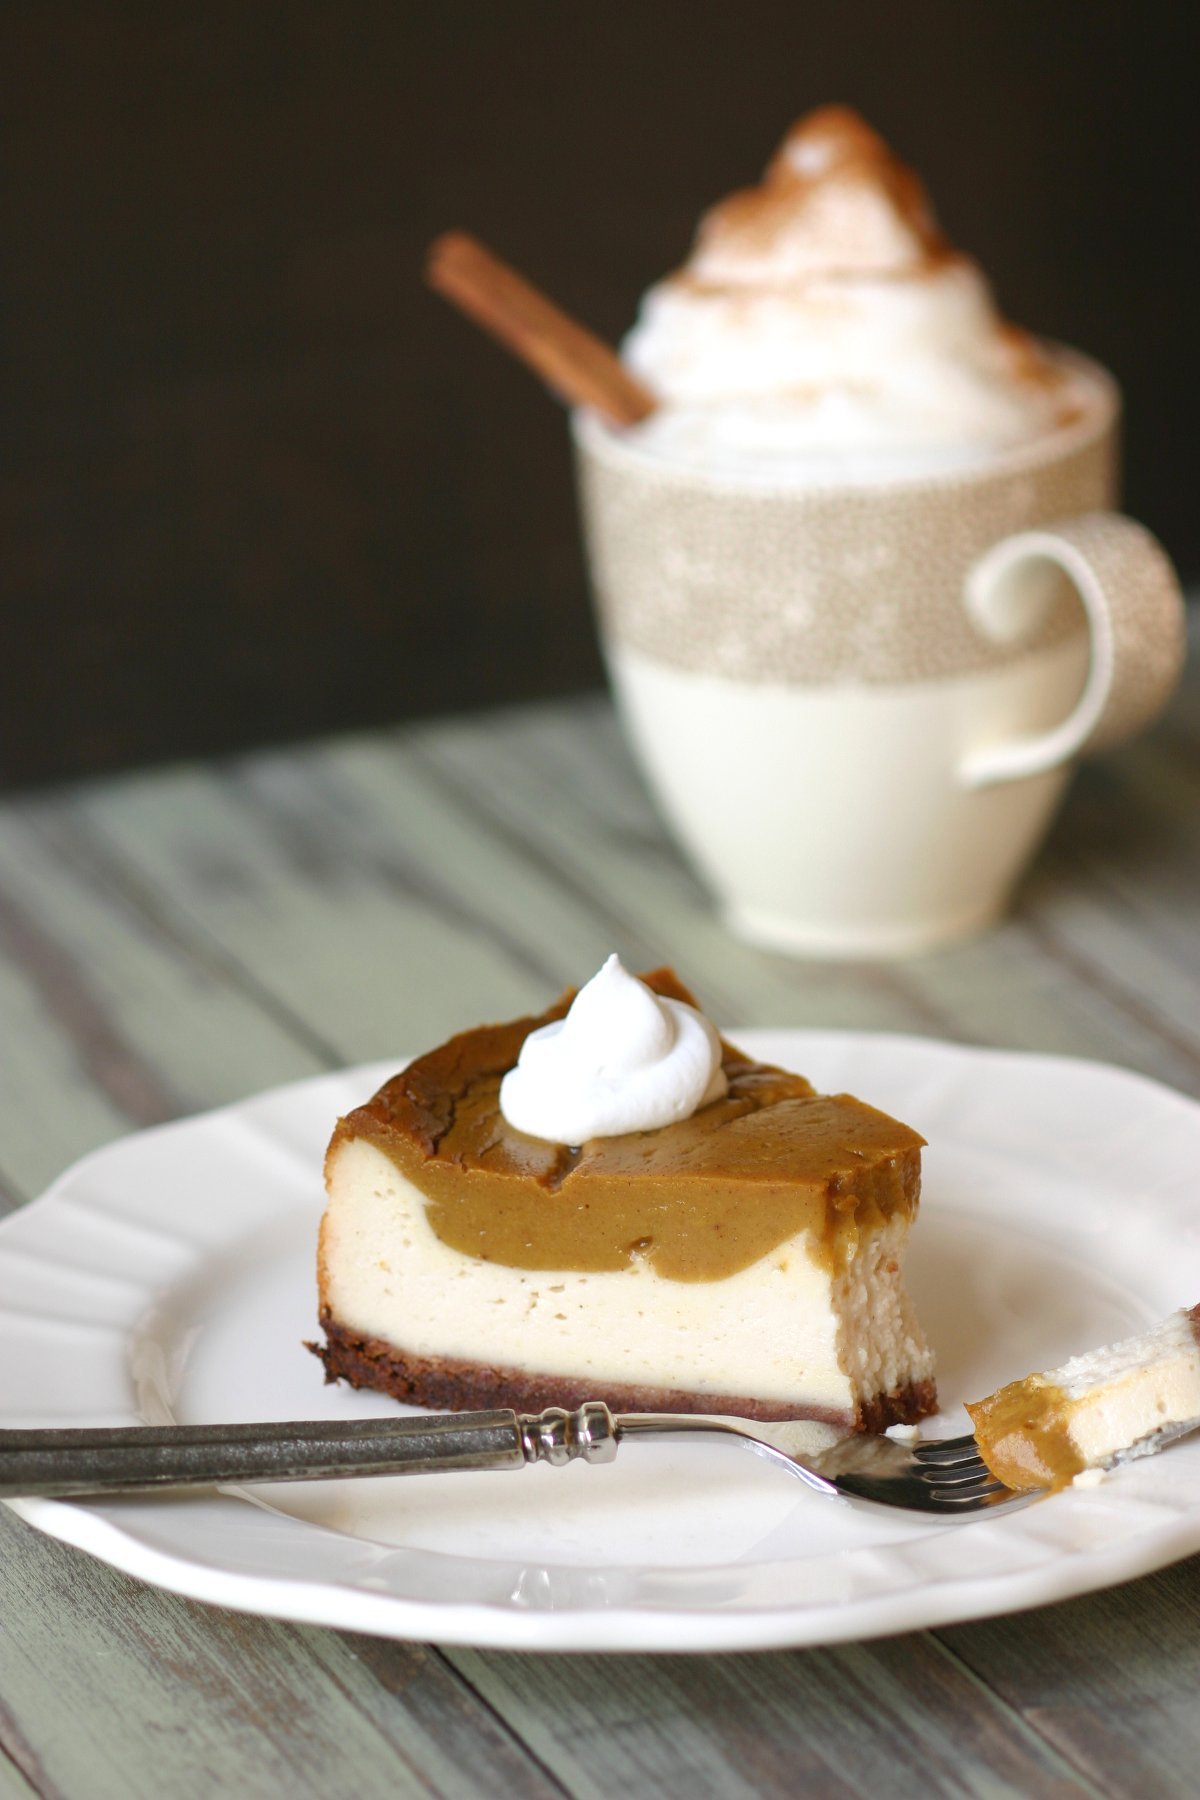 This recipe for Vegan Pumpkin Pie Cheesecake combines two of your favorite desserts to create one smooth, spiced, and rich sight to behold.